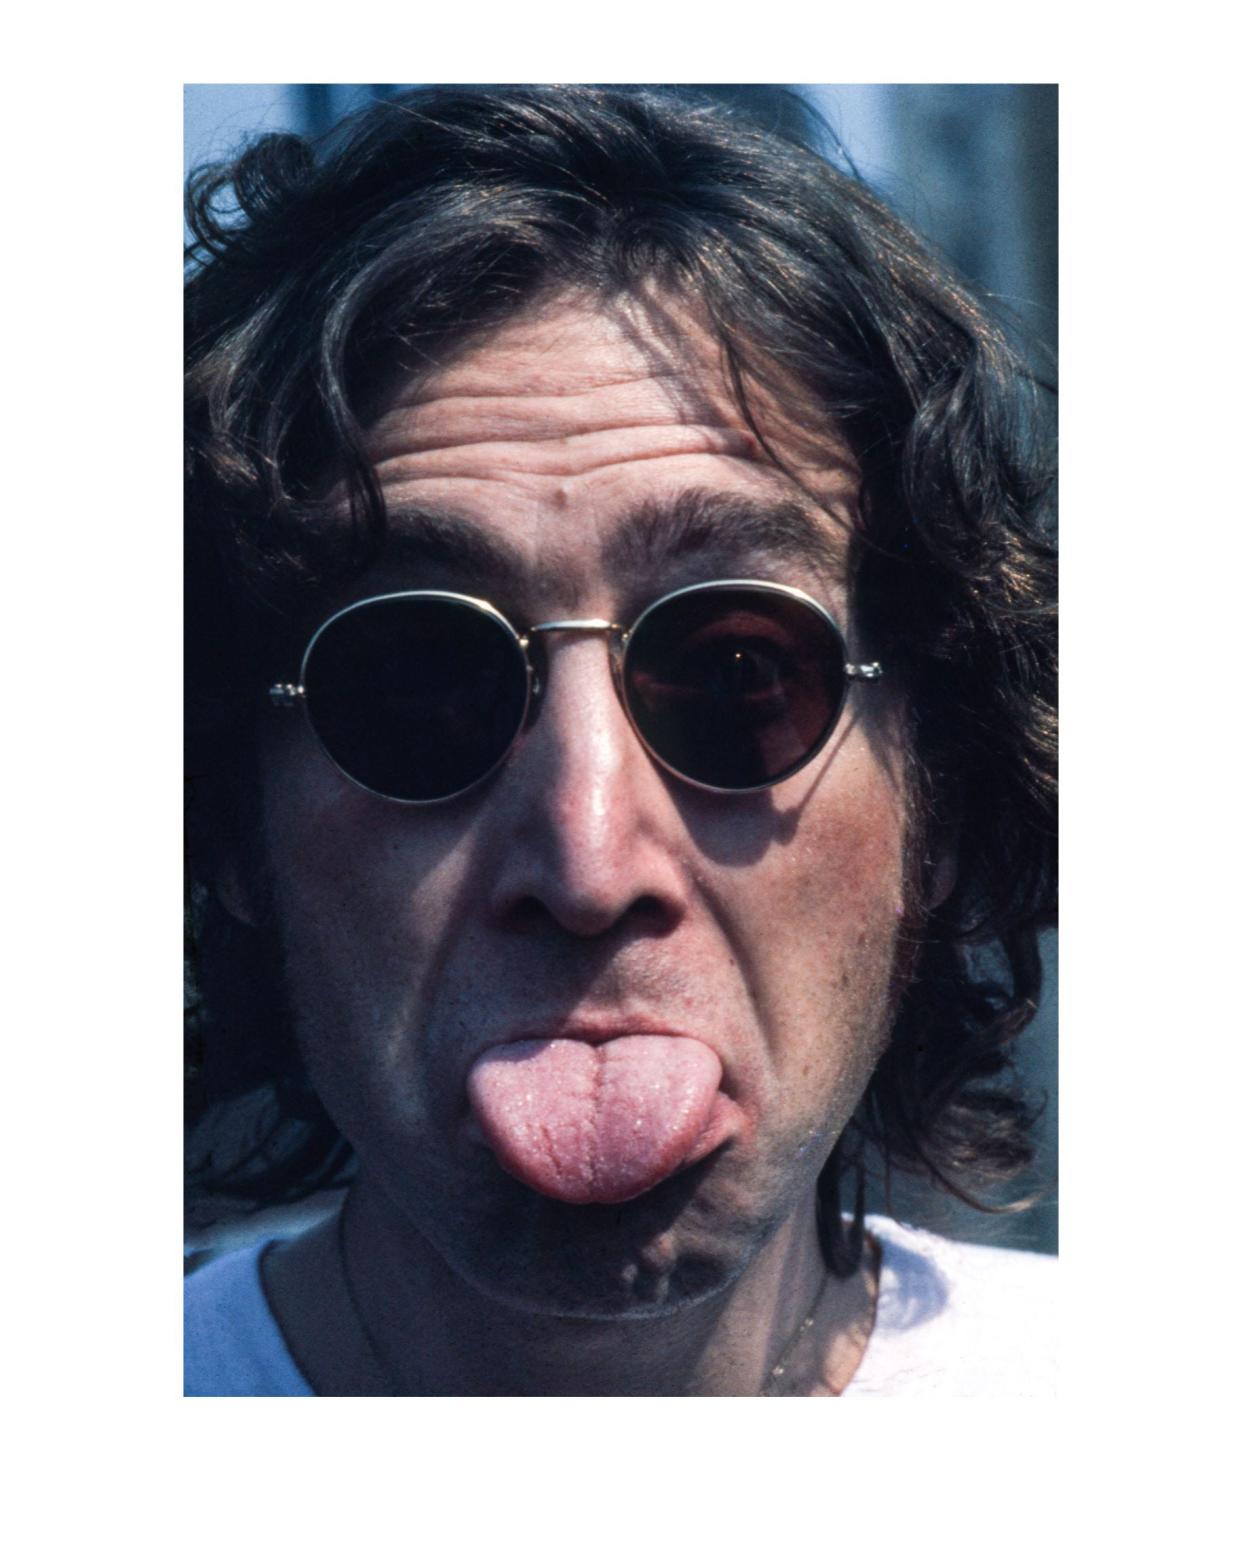 "The Lost Weekend: The Photography of May Pang" features candid photos of John Lennon by his former lover and confidant, May Pang. The exhibit will be on view at Gallery 42 in Mason on Tuesday and Wednesday, and Pang will be in attendance.